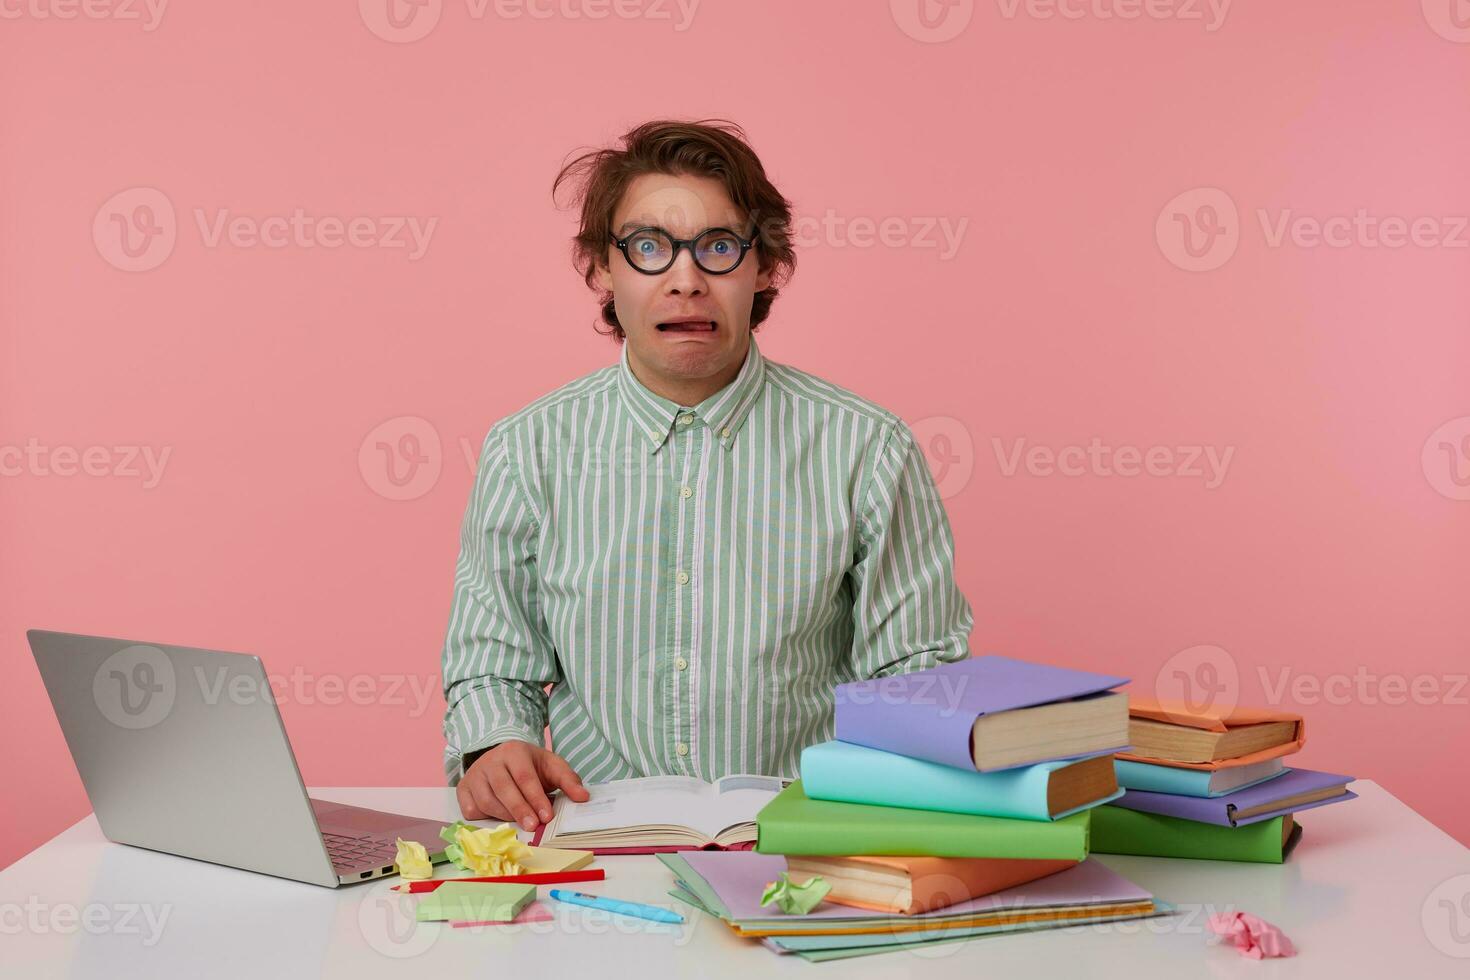 Portrait of young dark male with wild dark hair sitting at working table and making notes, grimacing over pink background in striped shirt and glasses photo